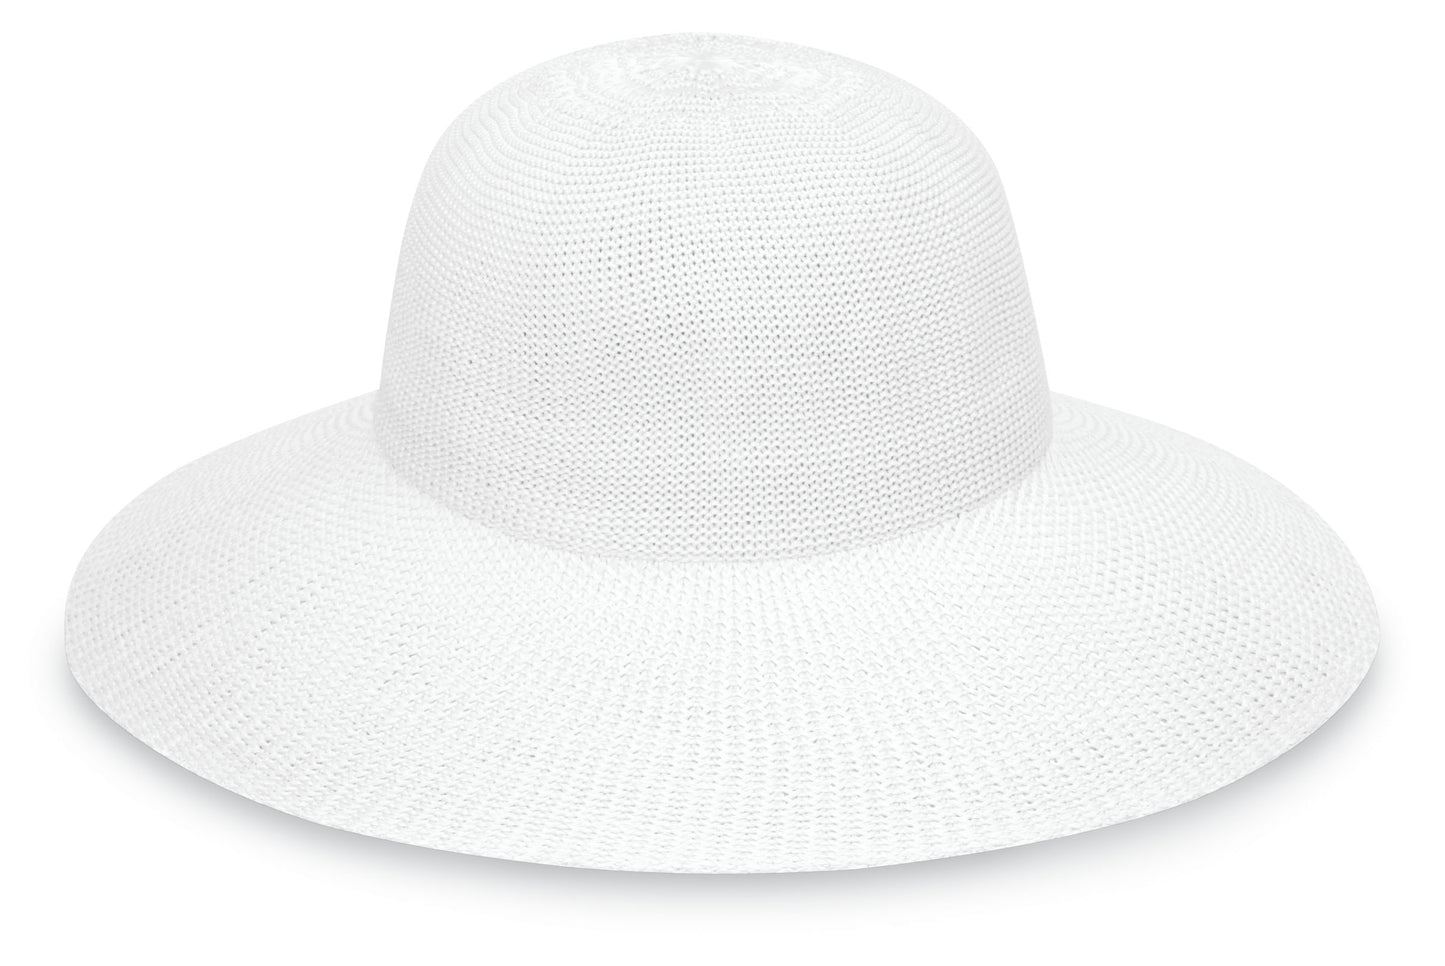 This packable white beach hat not only offers UPF 50+ sun protection but is also recommended by the Skin Cancer Foundation. Its wide brim ensures stylish sun coverage, making it a travel-friendly and fashionable addition to your personal fashion collection.